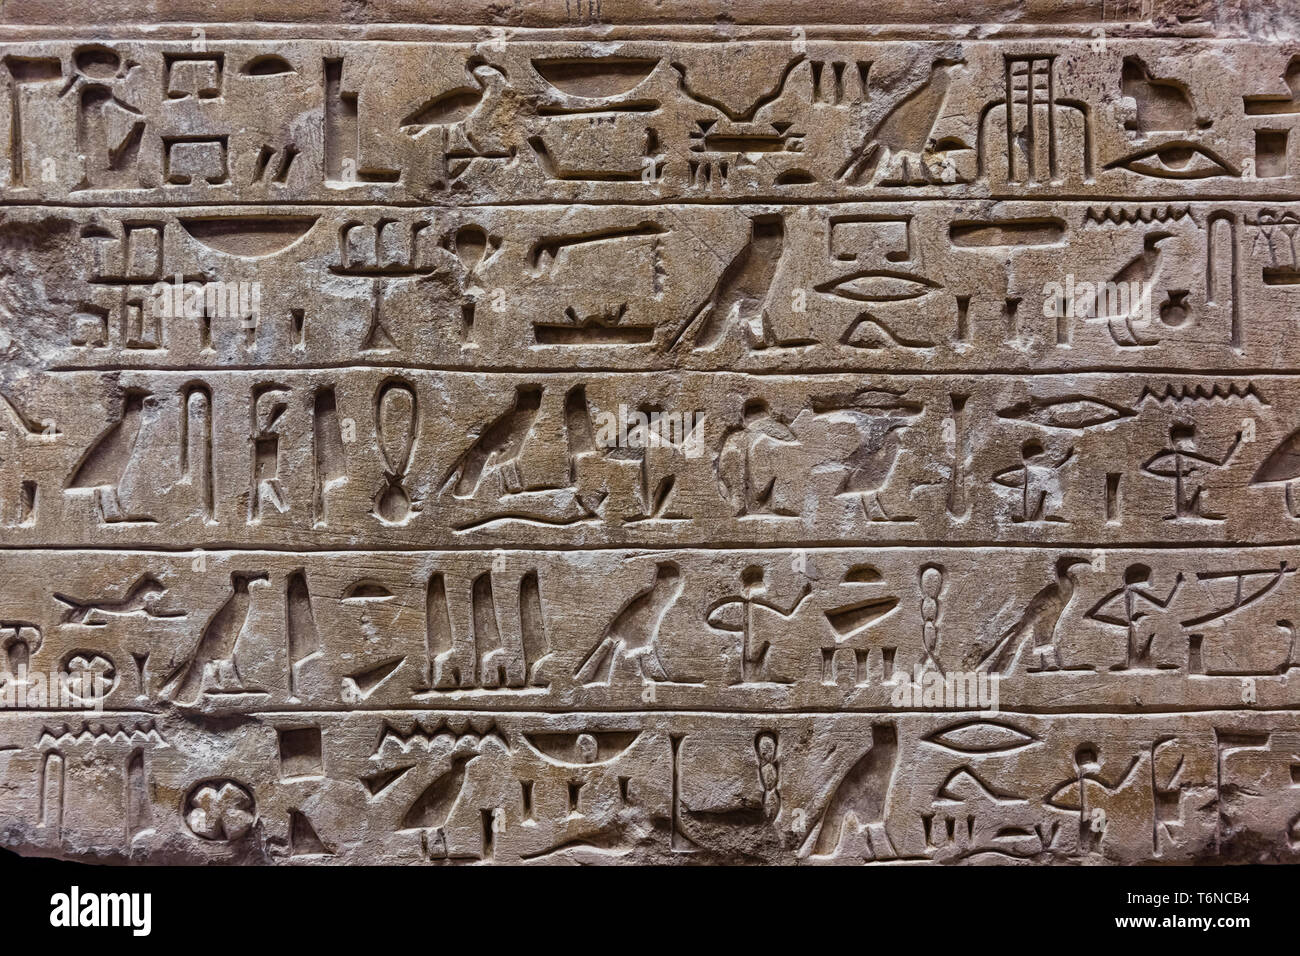 Old egypt scriptures background Stock Photo